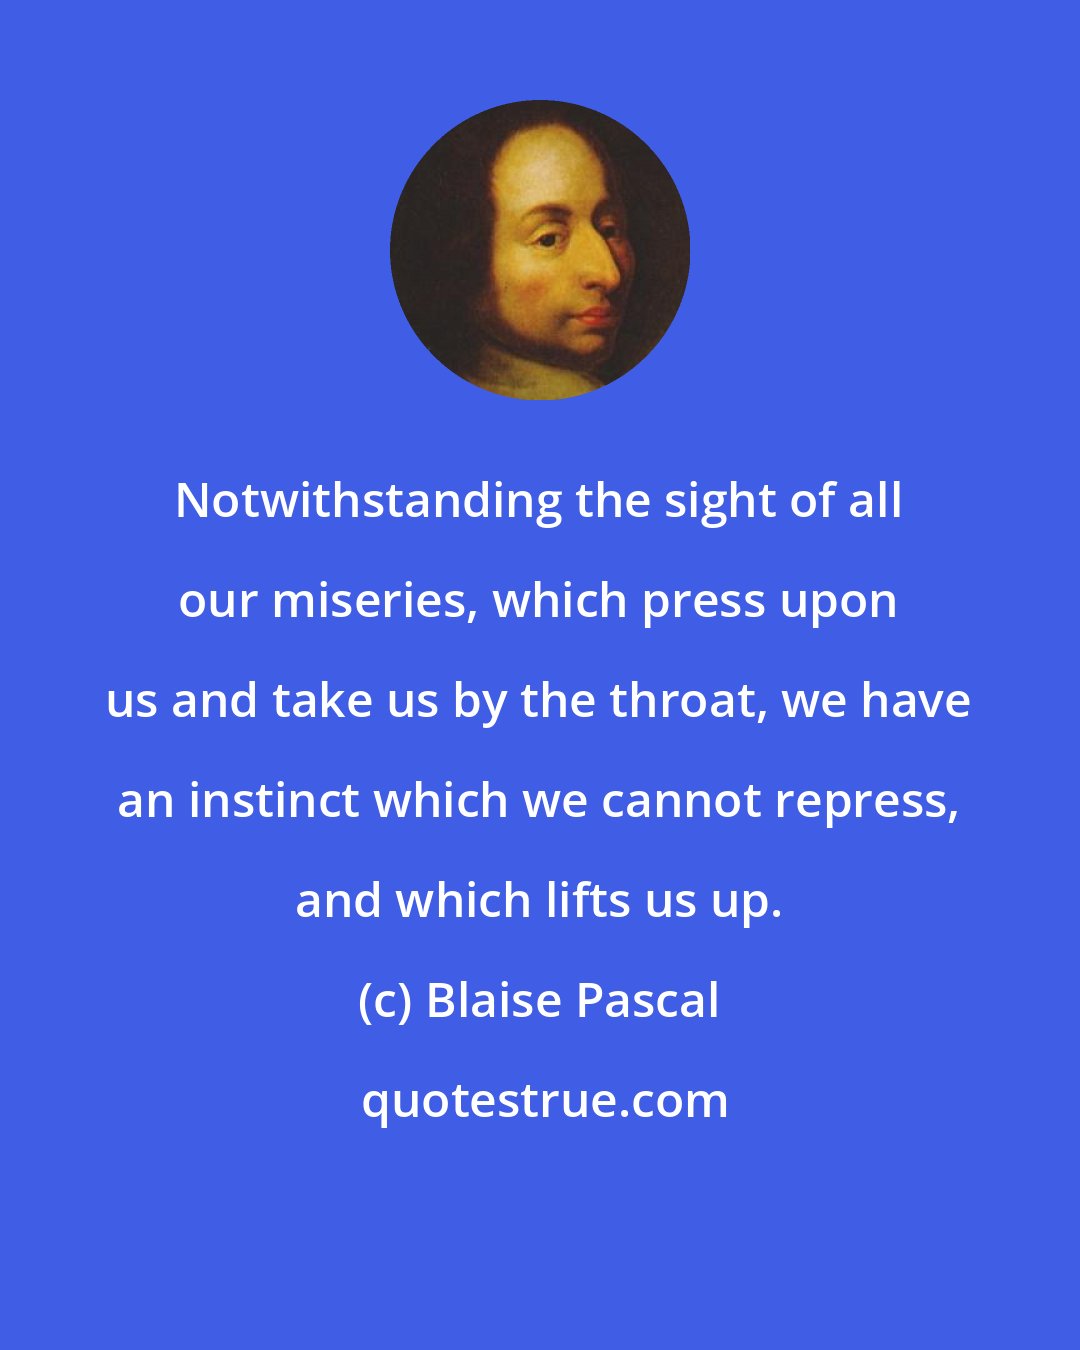 Blaise Pascal: Notwithstanding the sight of all our miseries, which press upon us and take us by the throat, we have an instinct which we cannot repress, and which lifts us up.